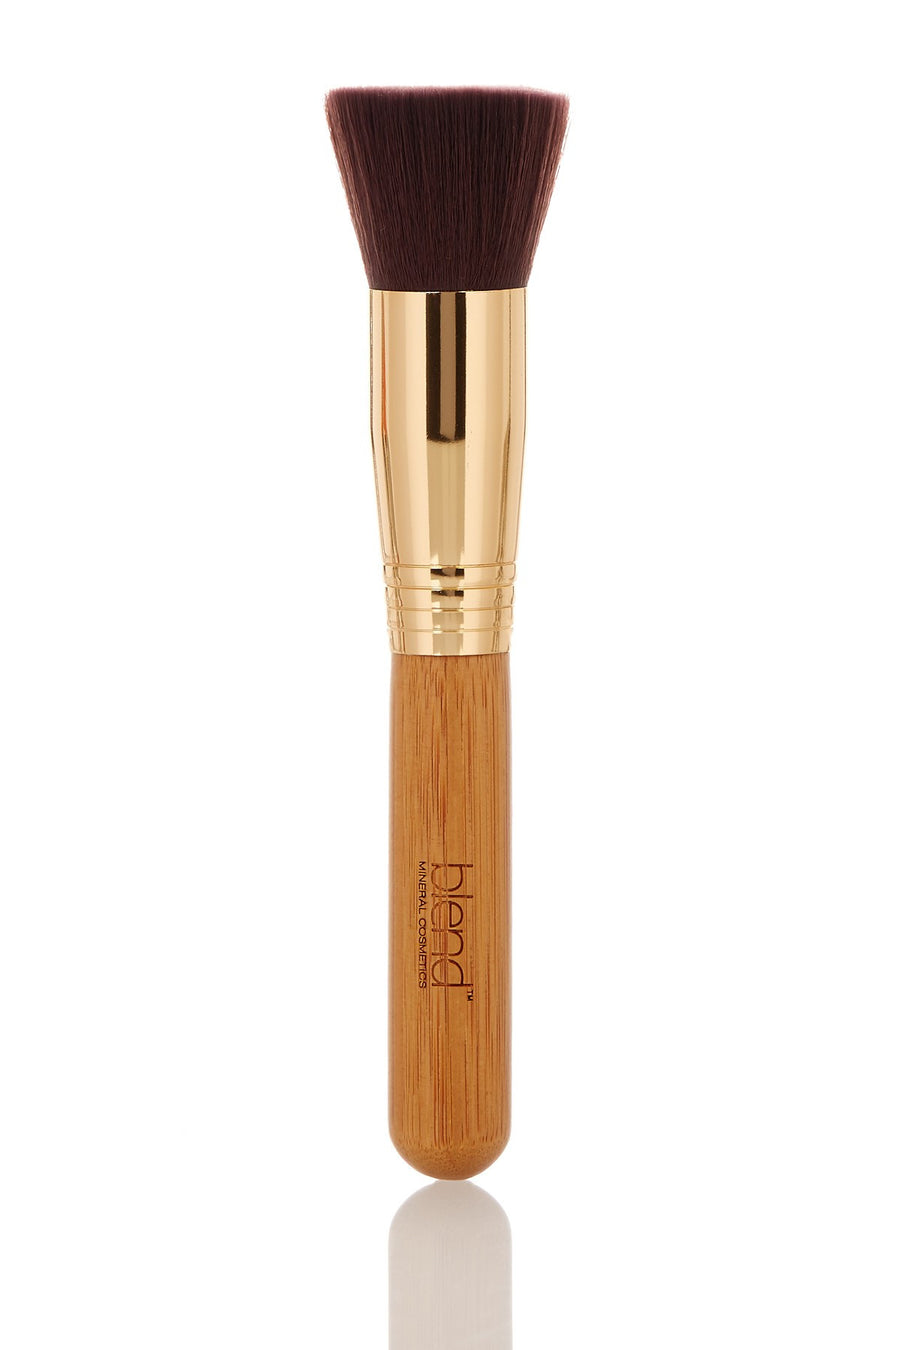 Professional Makeup Artist Complete 11-Piece Brush Kit - Bamboo - Blend Mineral Cosmetics